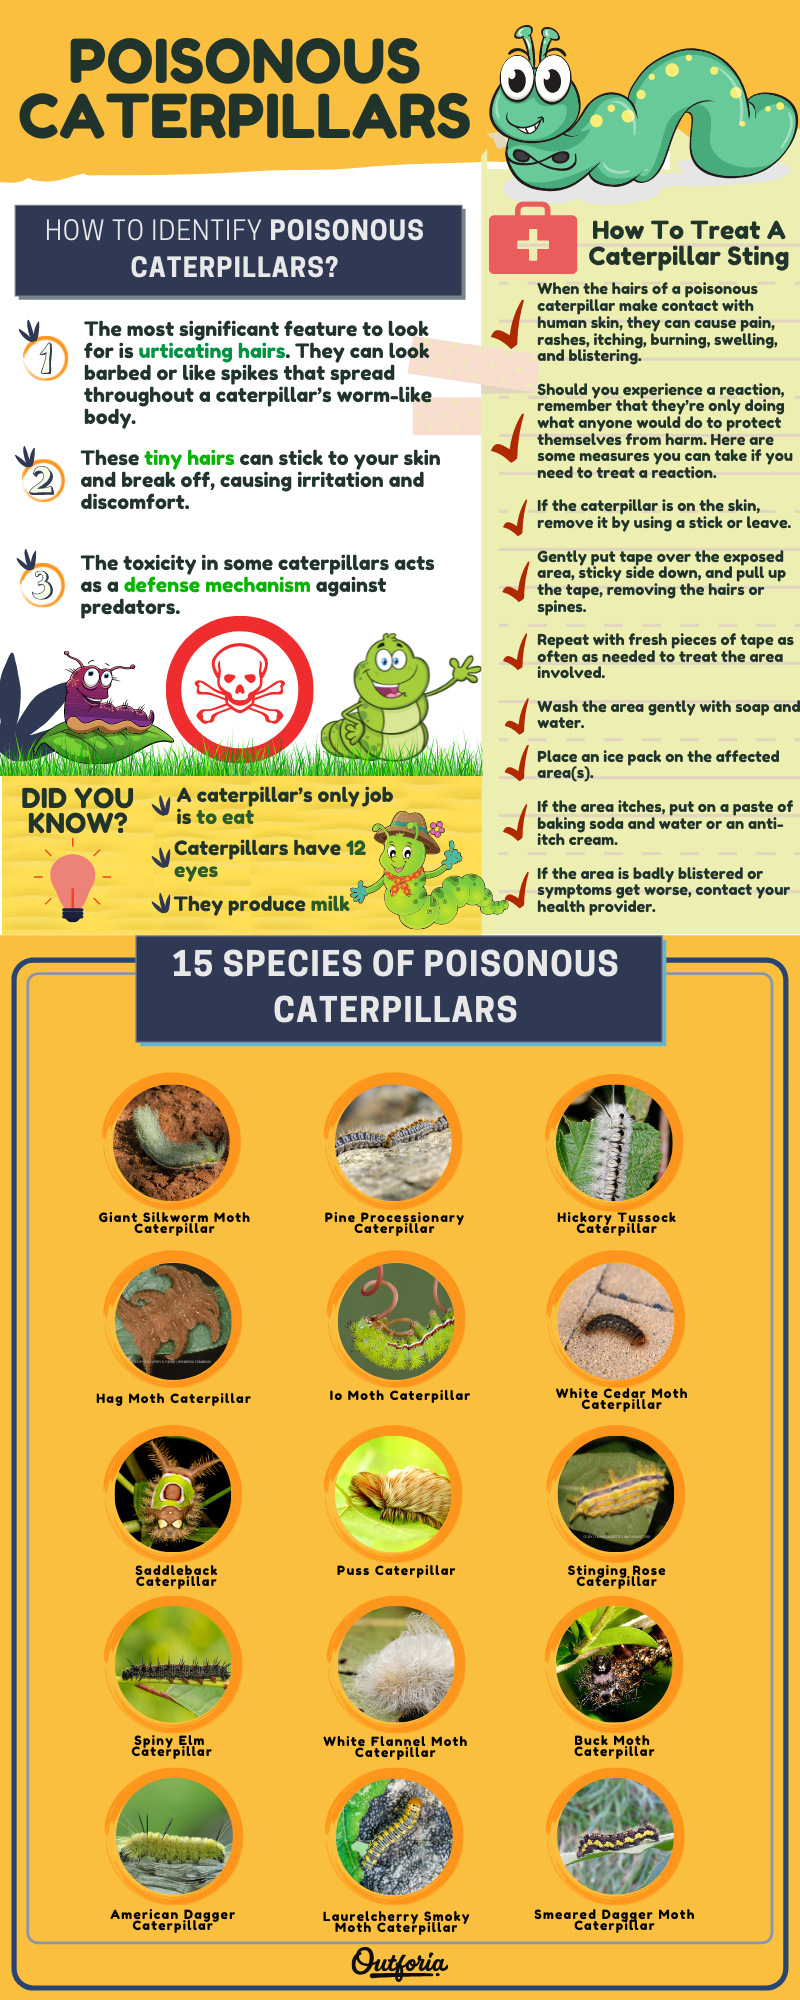 Poisonous caterpillars chart and infographic